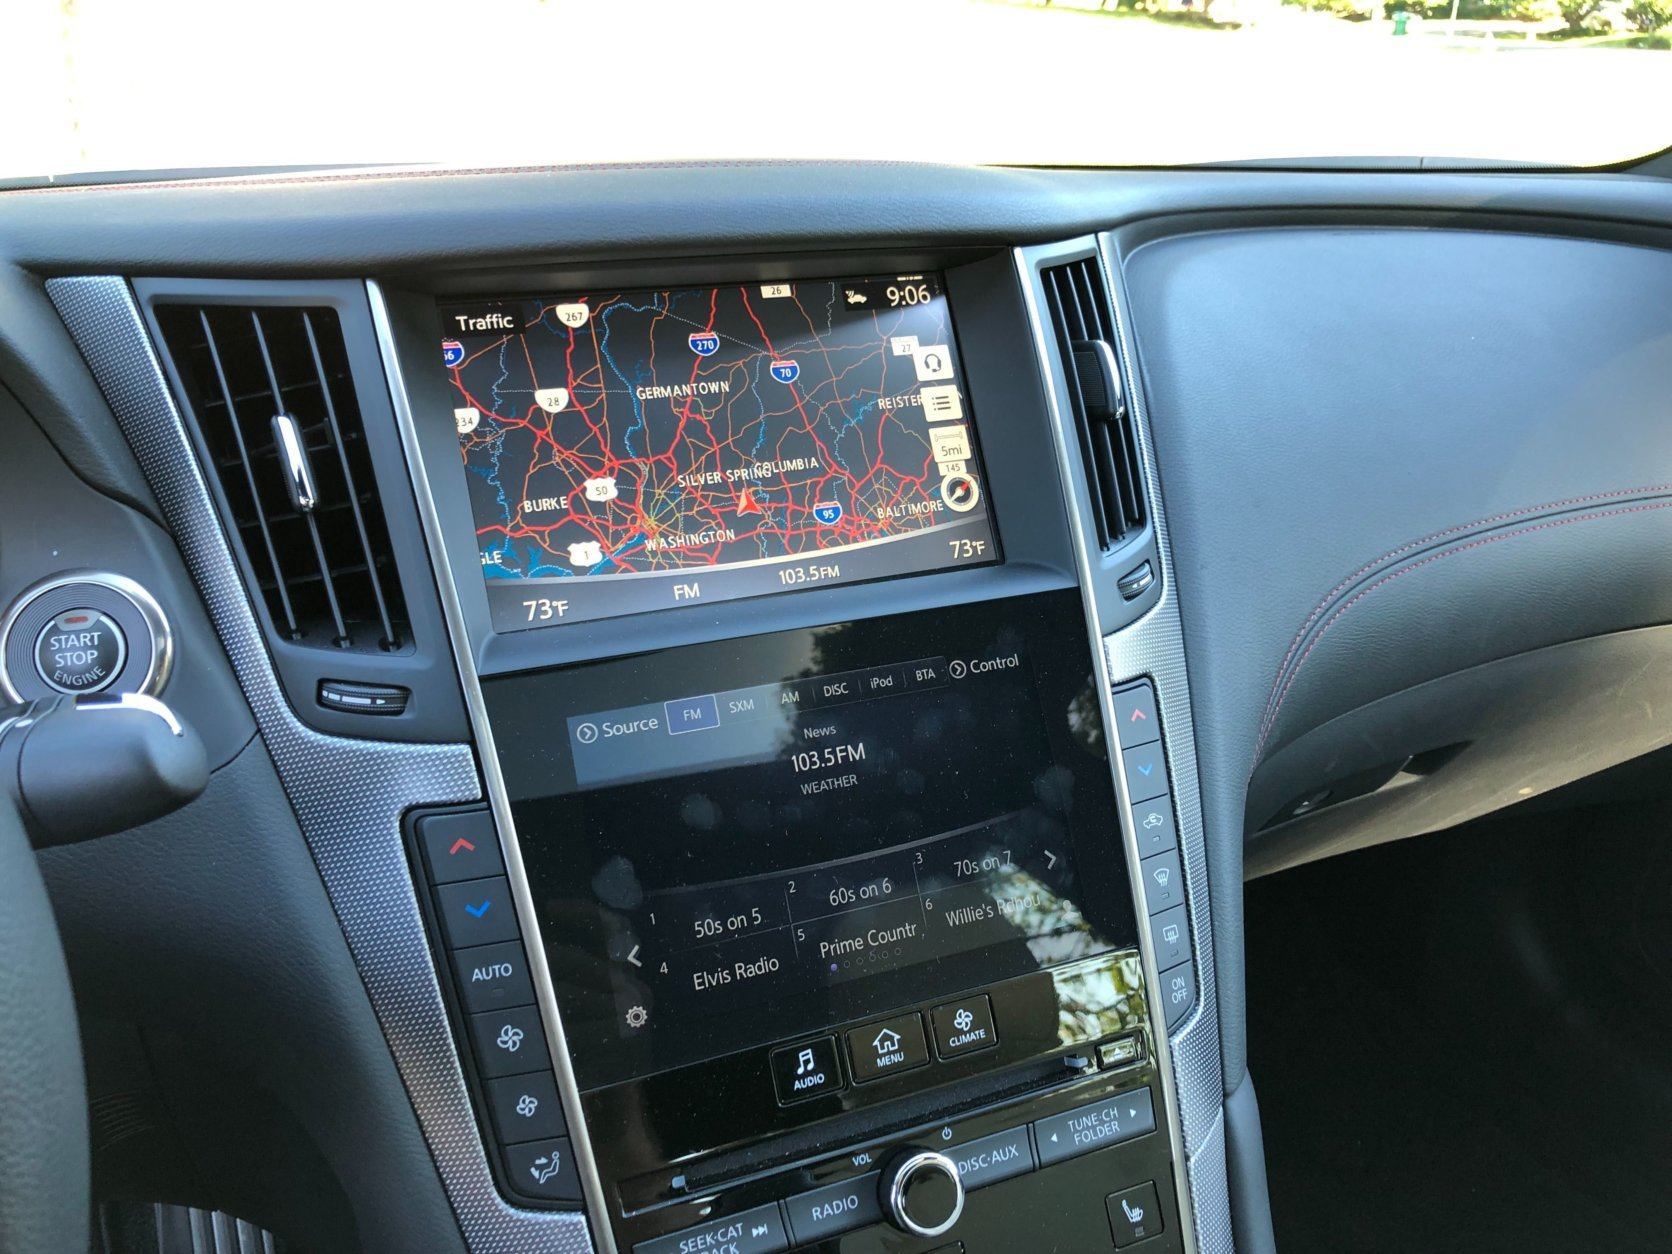 <p>Simple gauges greet the driver. They are large and easy to read. I personally liked the analog look. The Q50 has not one, but two center screens which may take some time getting used to.</p>
